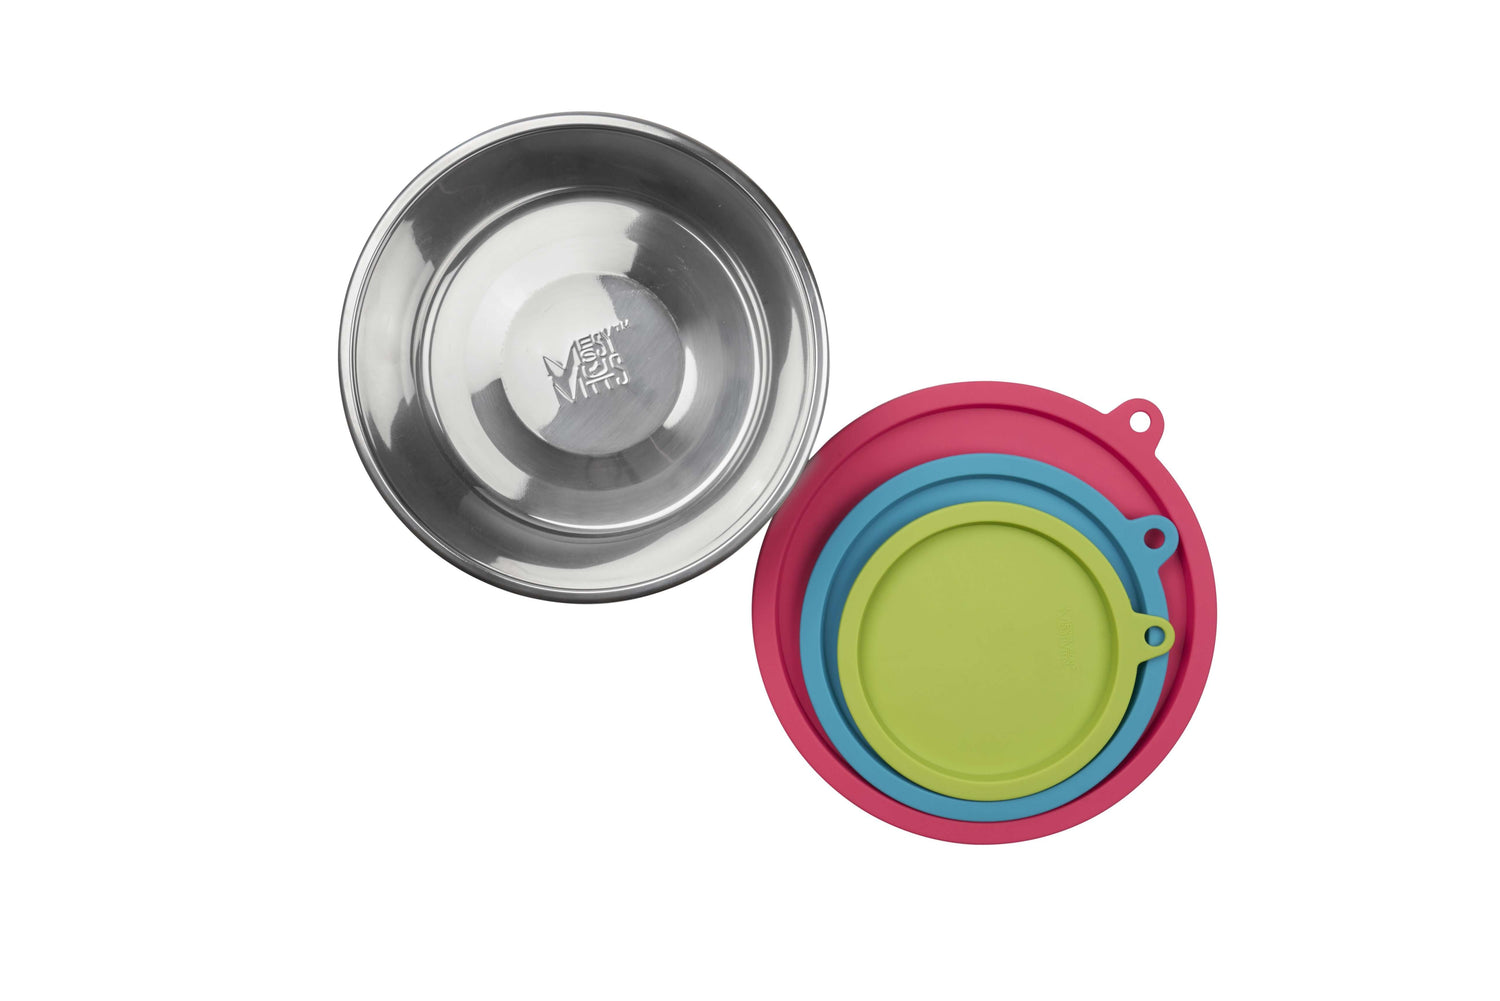 Three sizes of bowls with lids to fit your messy Mutts feeders amongst other recognized brands. Dishwasher safe.